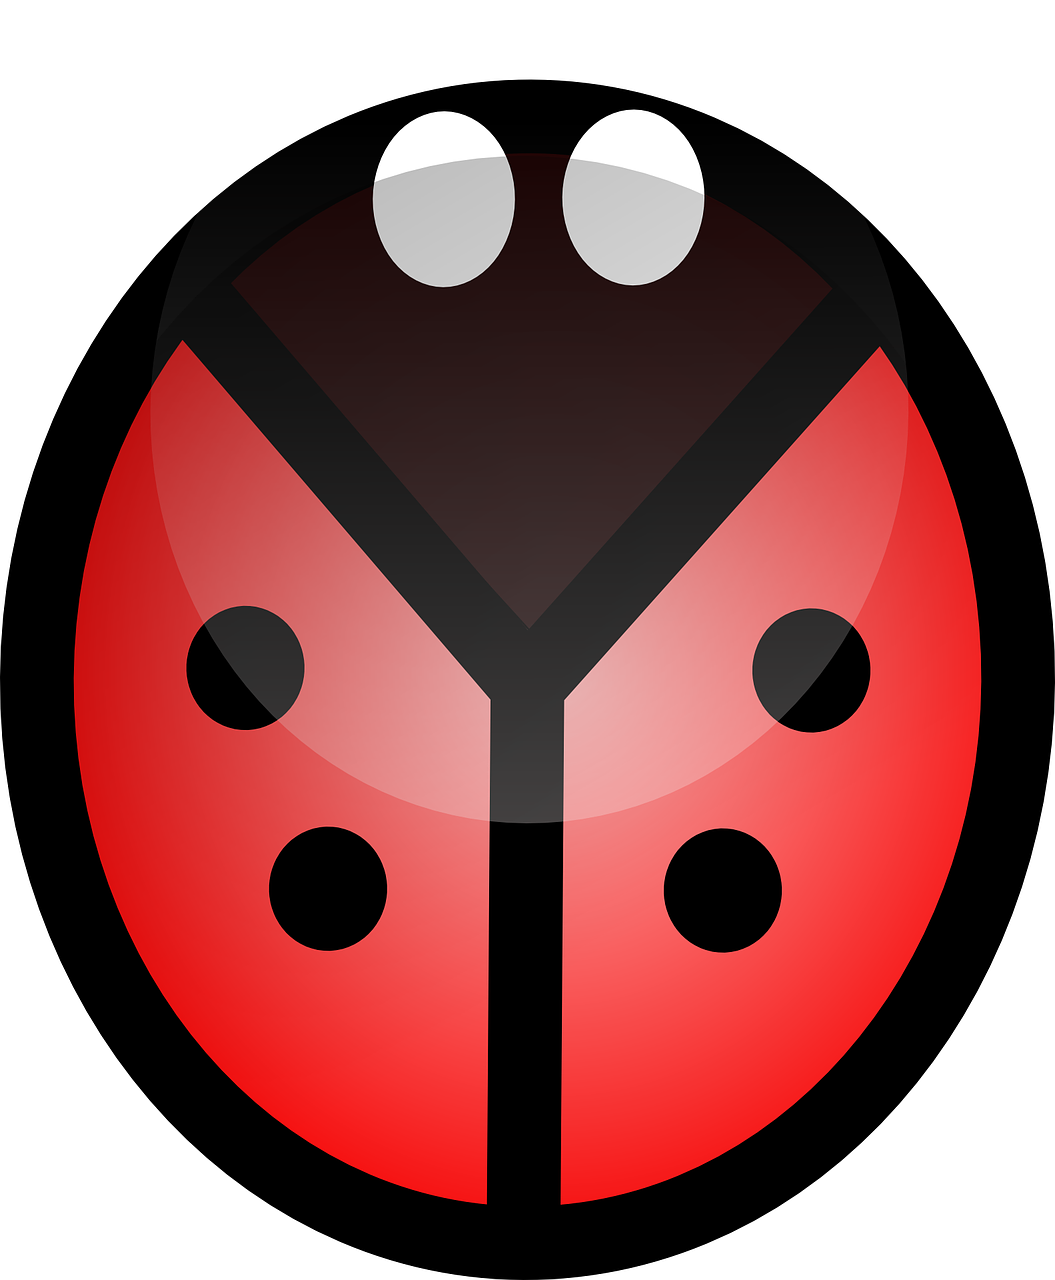 Ladybug Bug Insect Ladybird Red Png Picpng